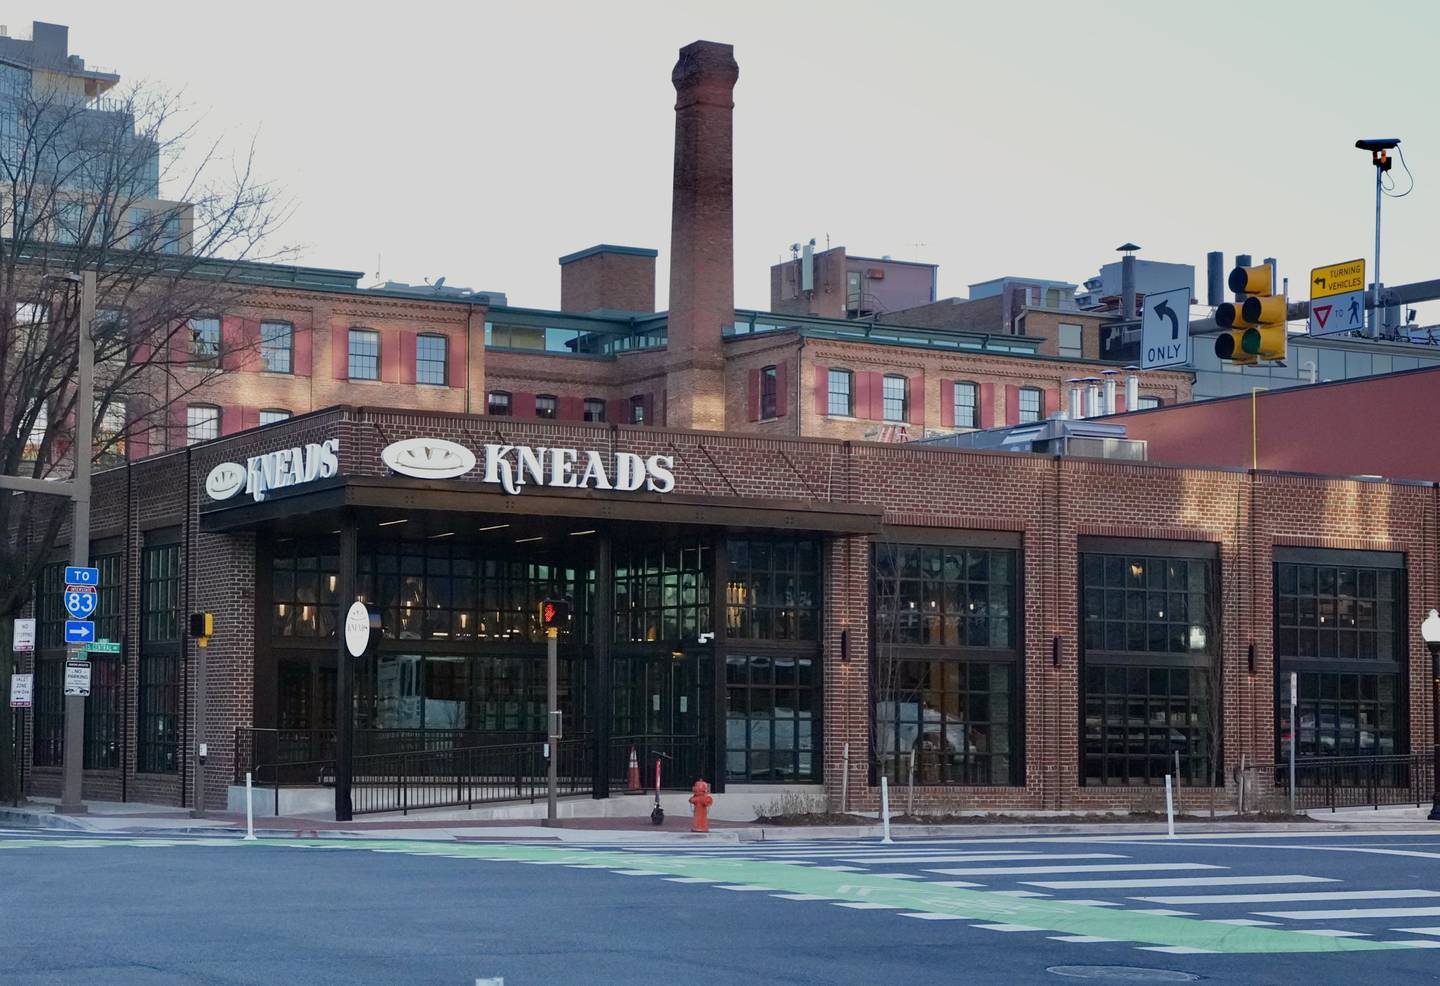 Kneads Bakery and Cafe located in Harbor East.